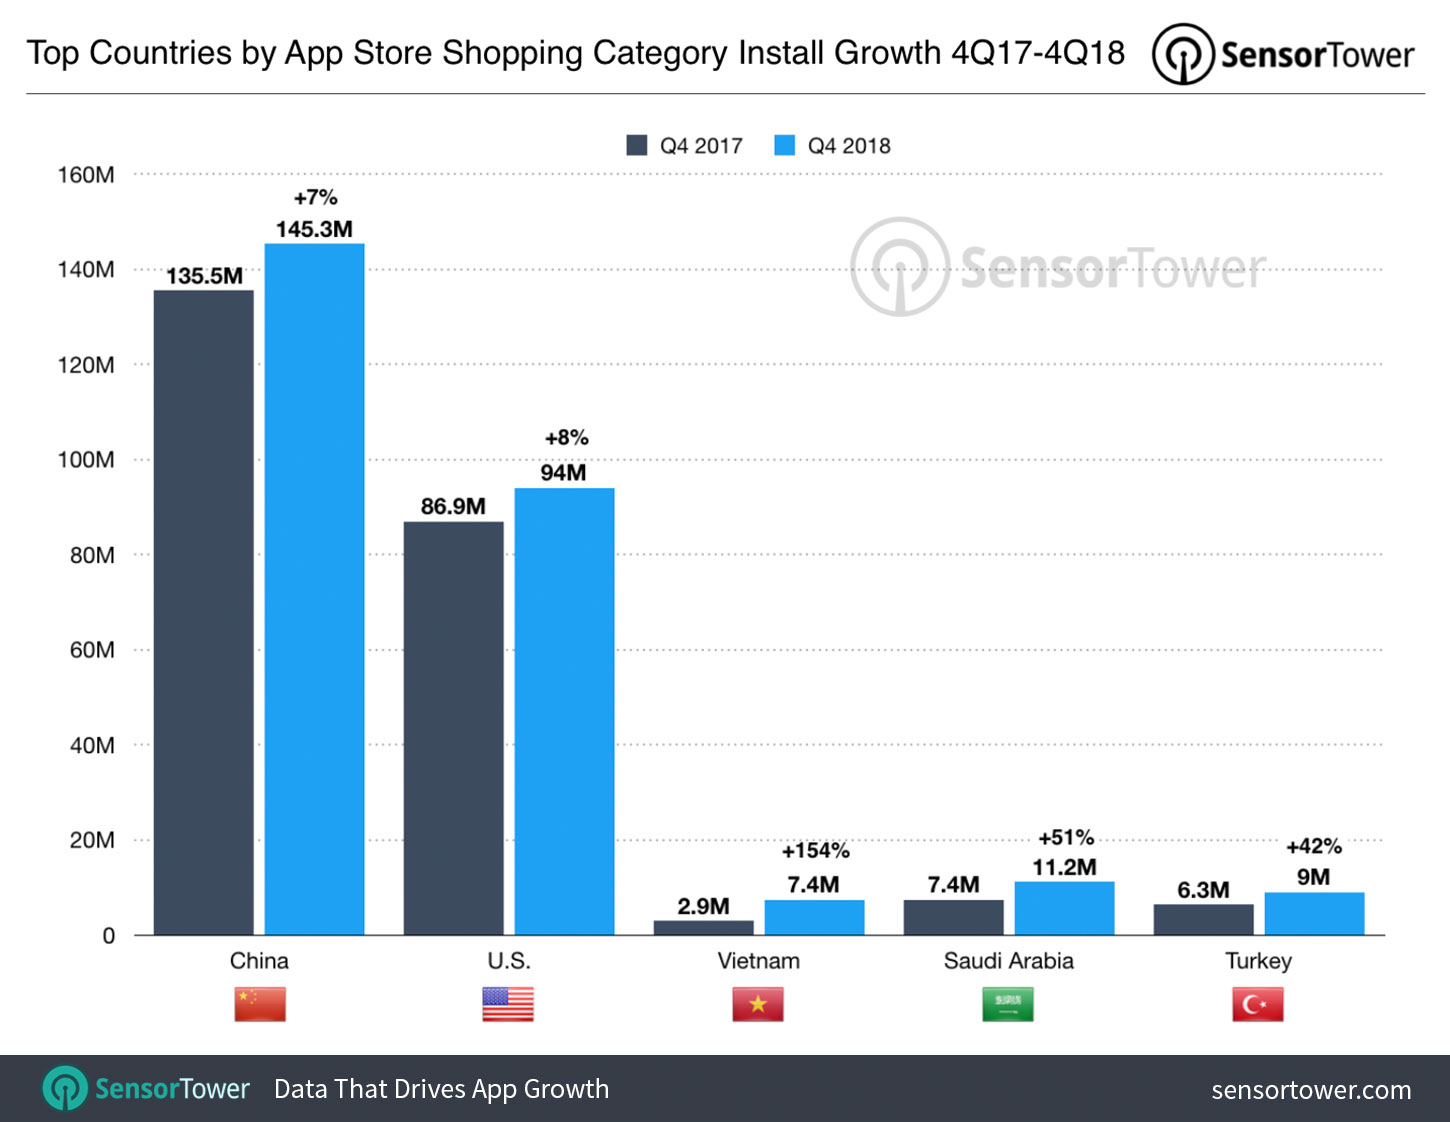 Top Countries for Shopping Apps by Growth in the App Store